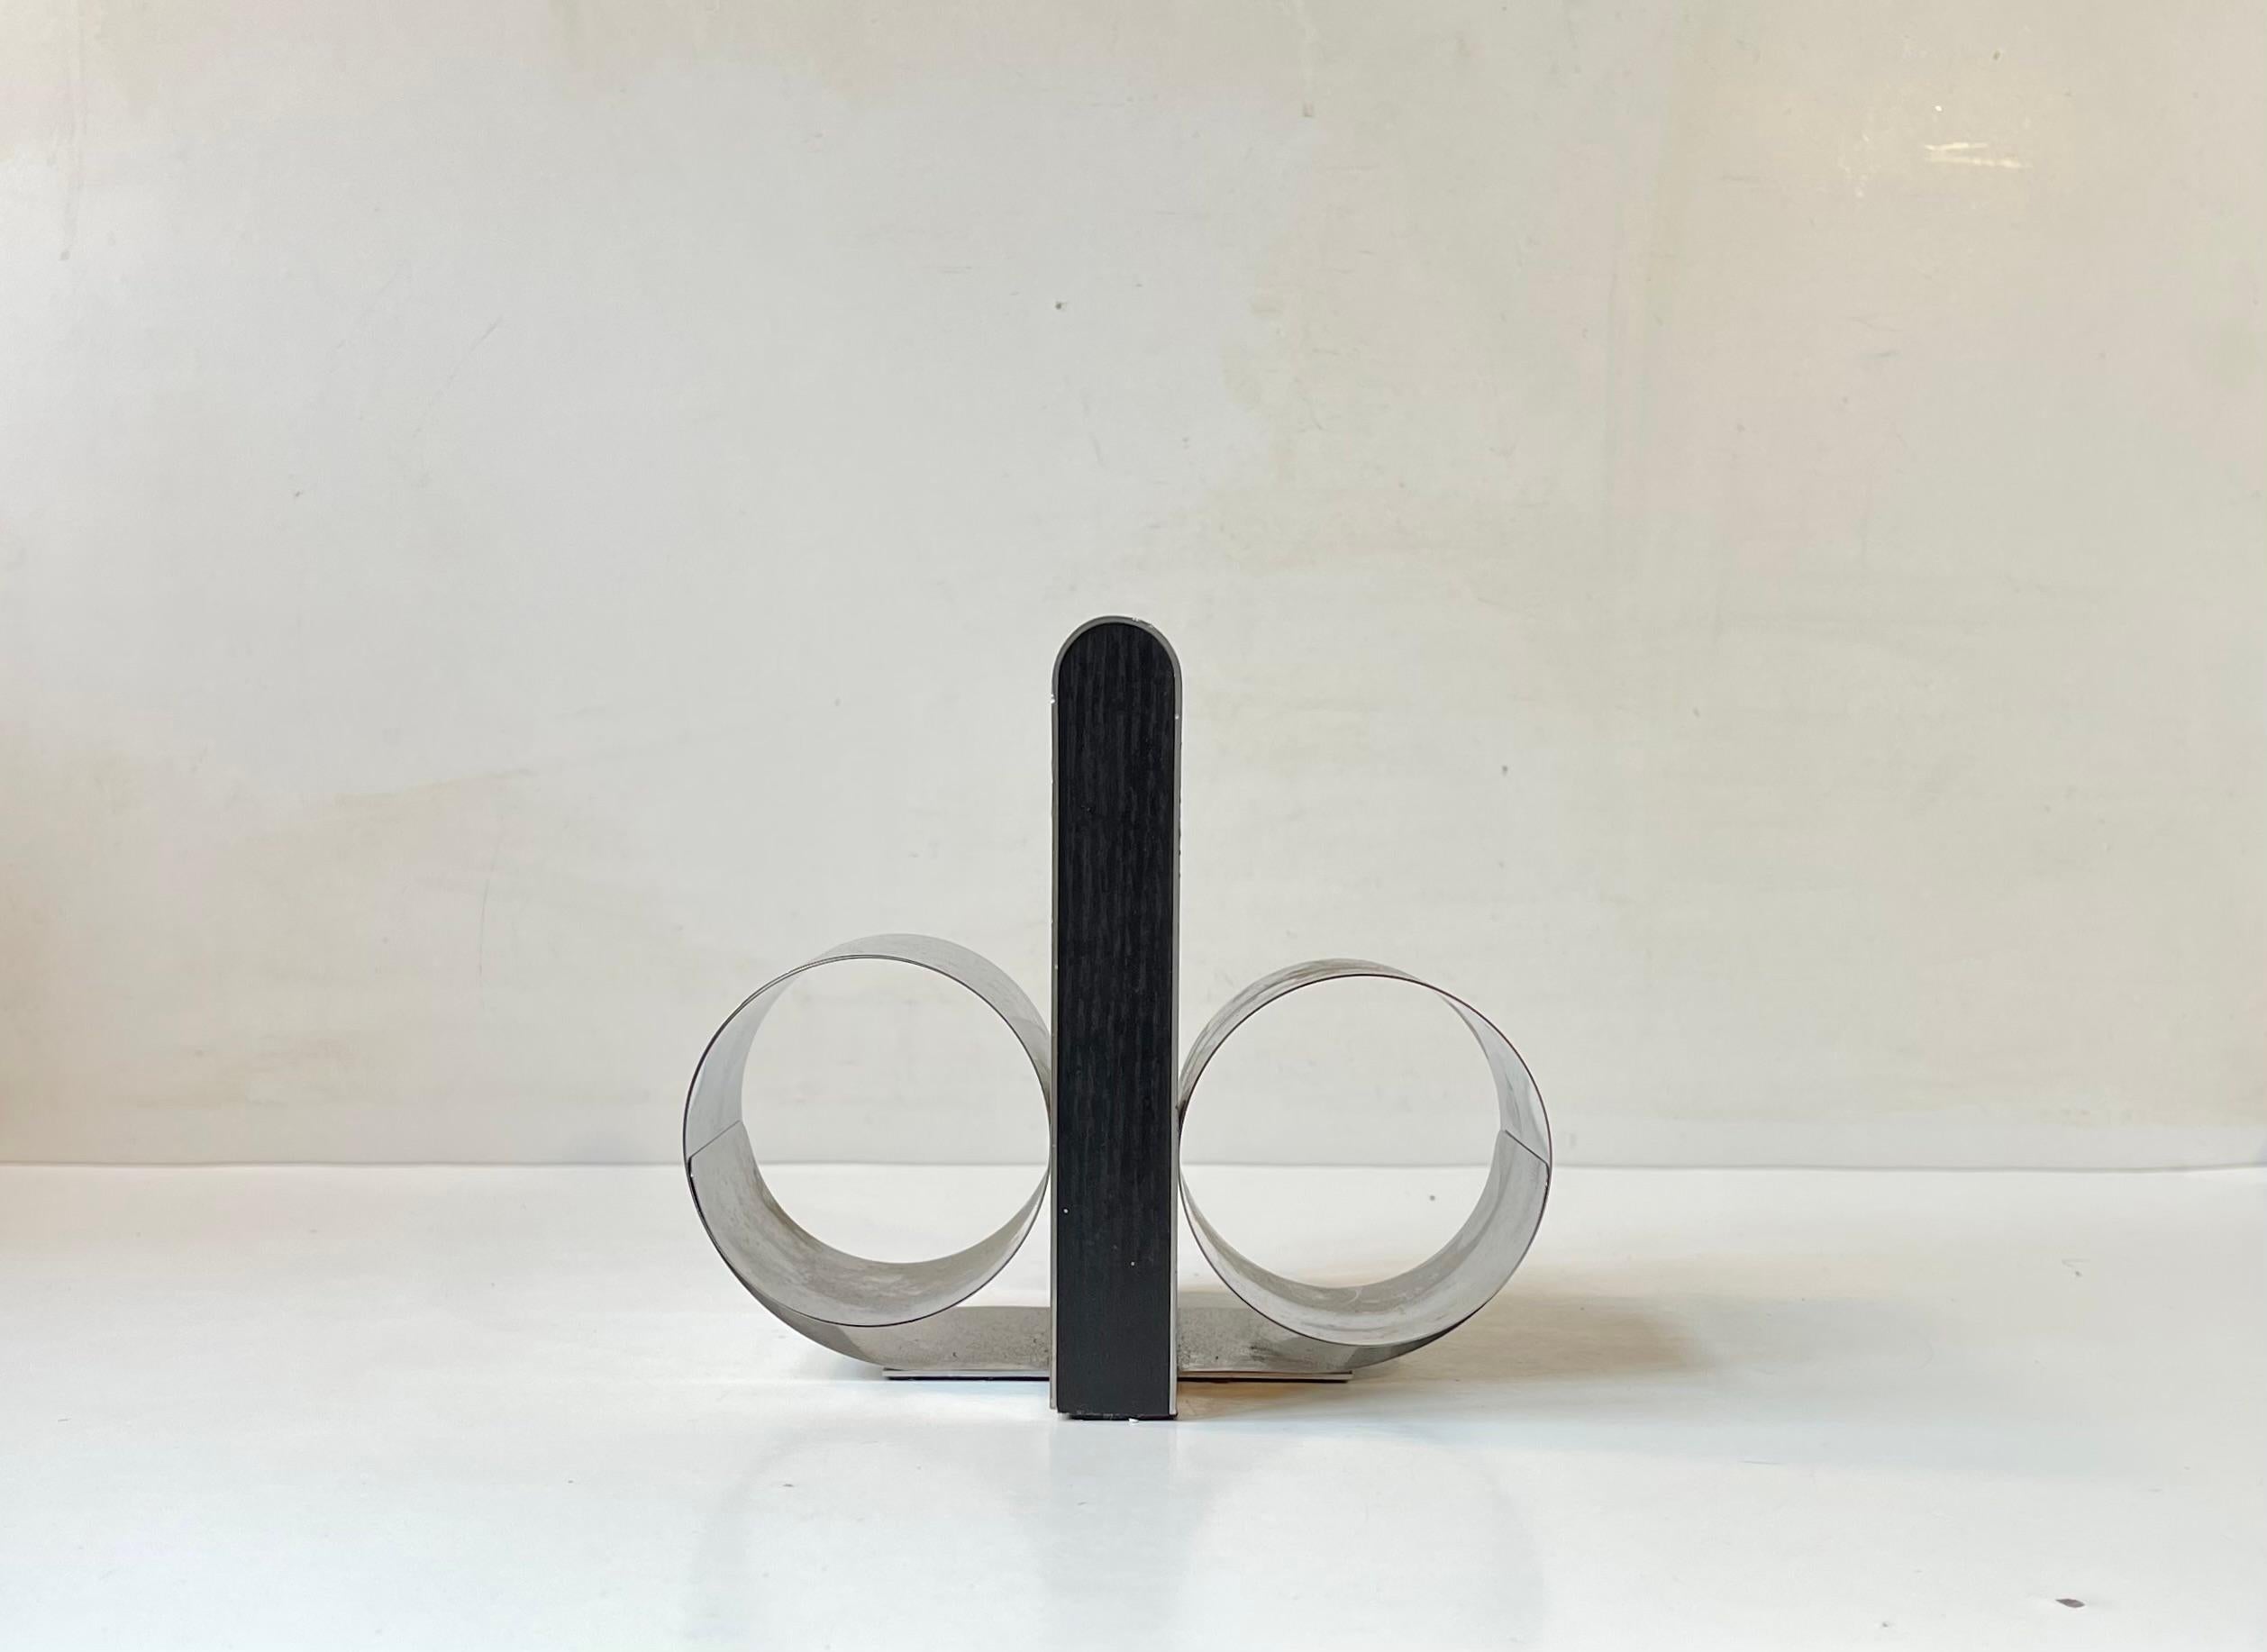 A clever design in the shape of a vinyl, CD, game(s), video or book holder with expandable rolled up sides. Its made from stainless steel and has a center in black painted wood. Designed by Andreas Mikkelsen and made by Georg Jensen in Denmark